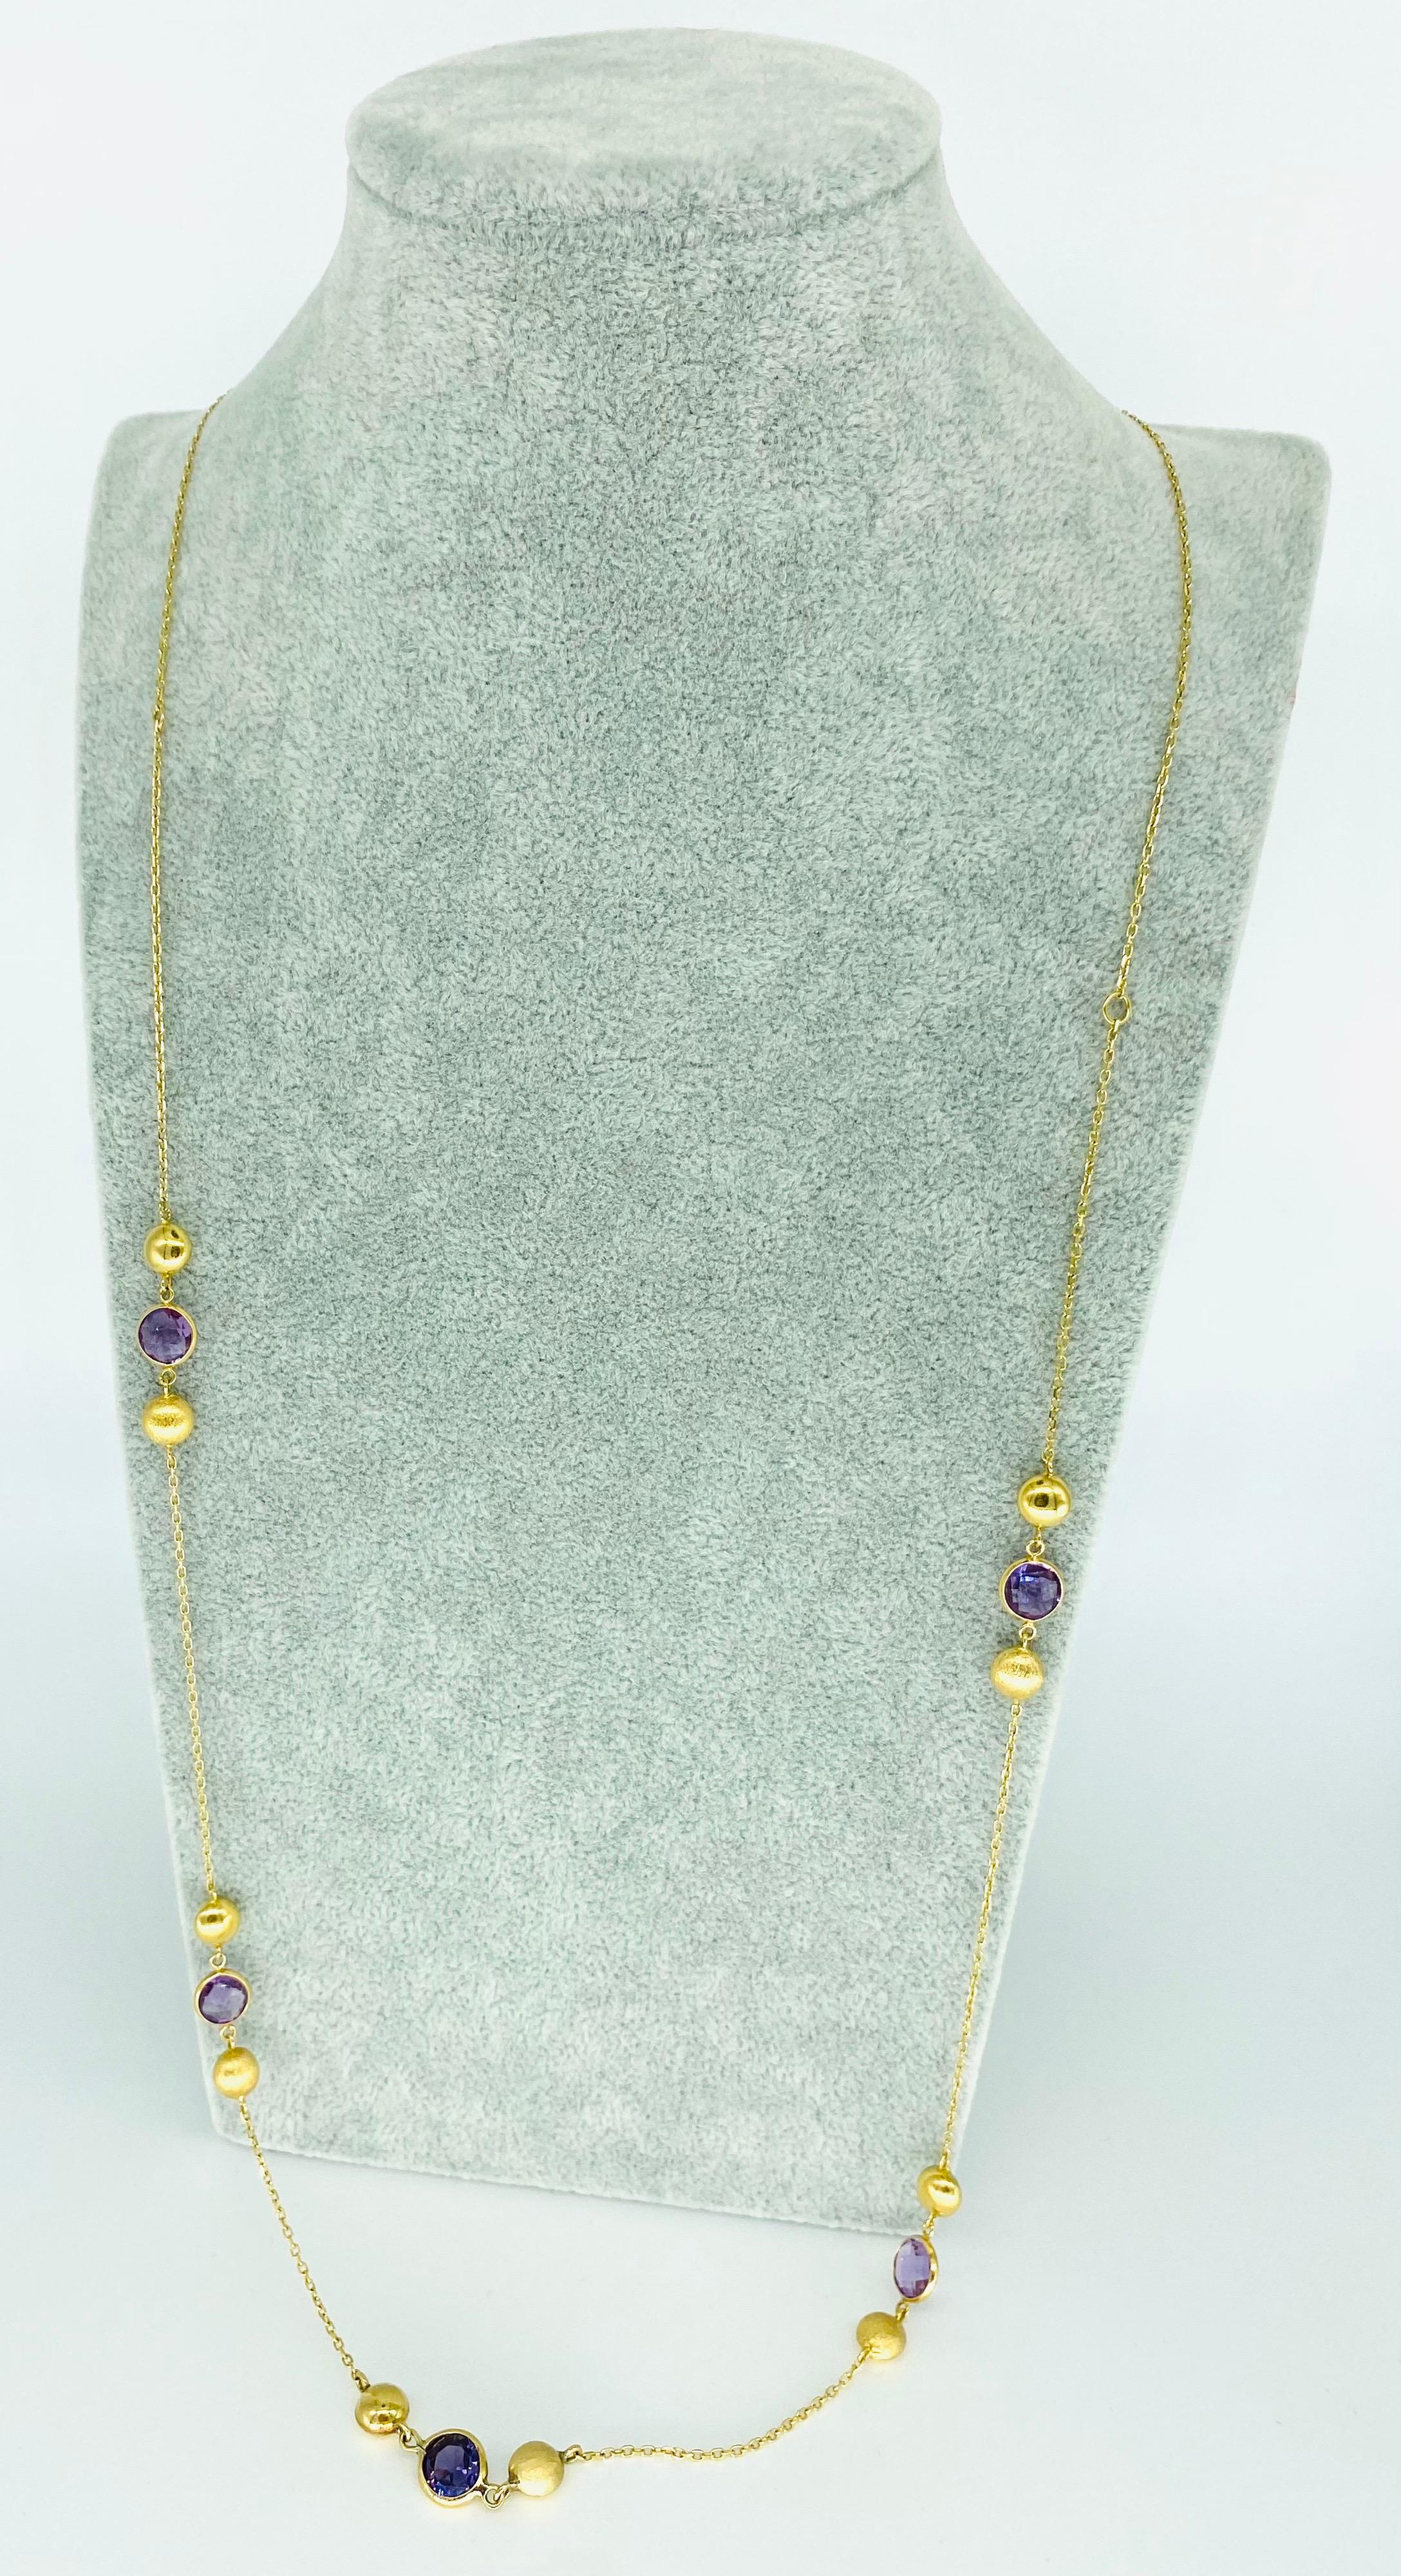 Vintage Amethyst & Purple Topaz Gemstone Long Necklace 35 Inches 18 Karat Gold. Dazzling amethyst gemstones in this extra long necklace. Featuring four amethyst measuring 8.5mm each & one purple topaz gemstone measuring 9mm. The back lace weights